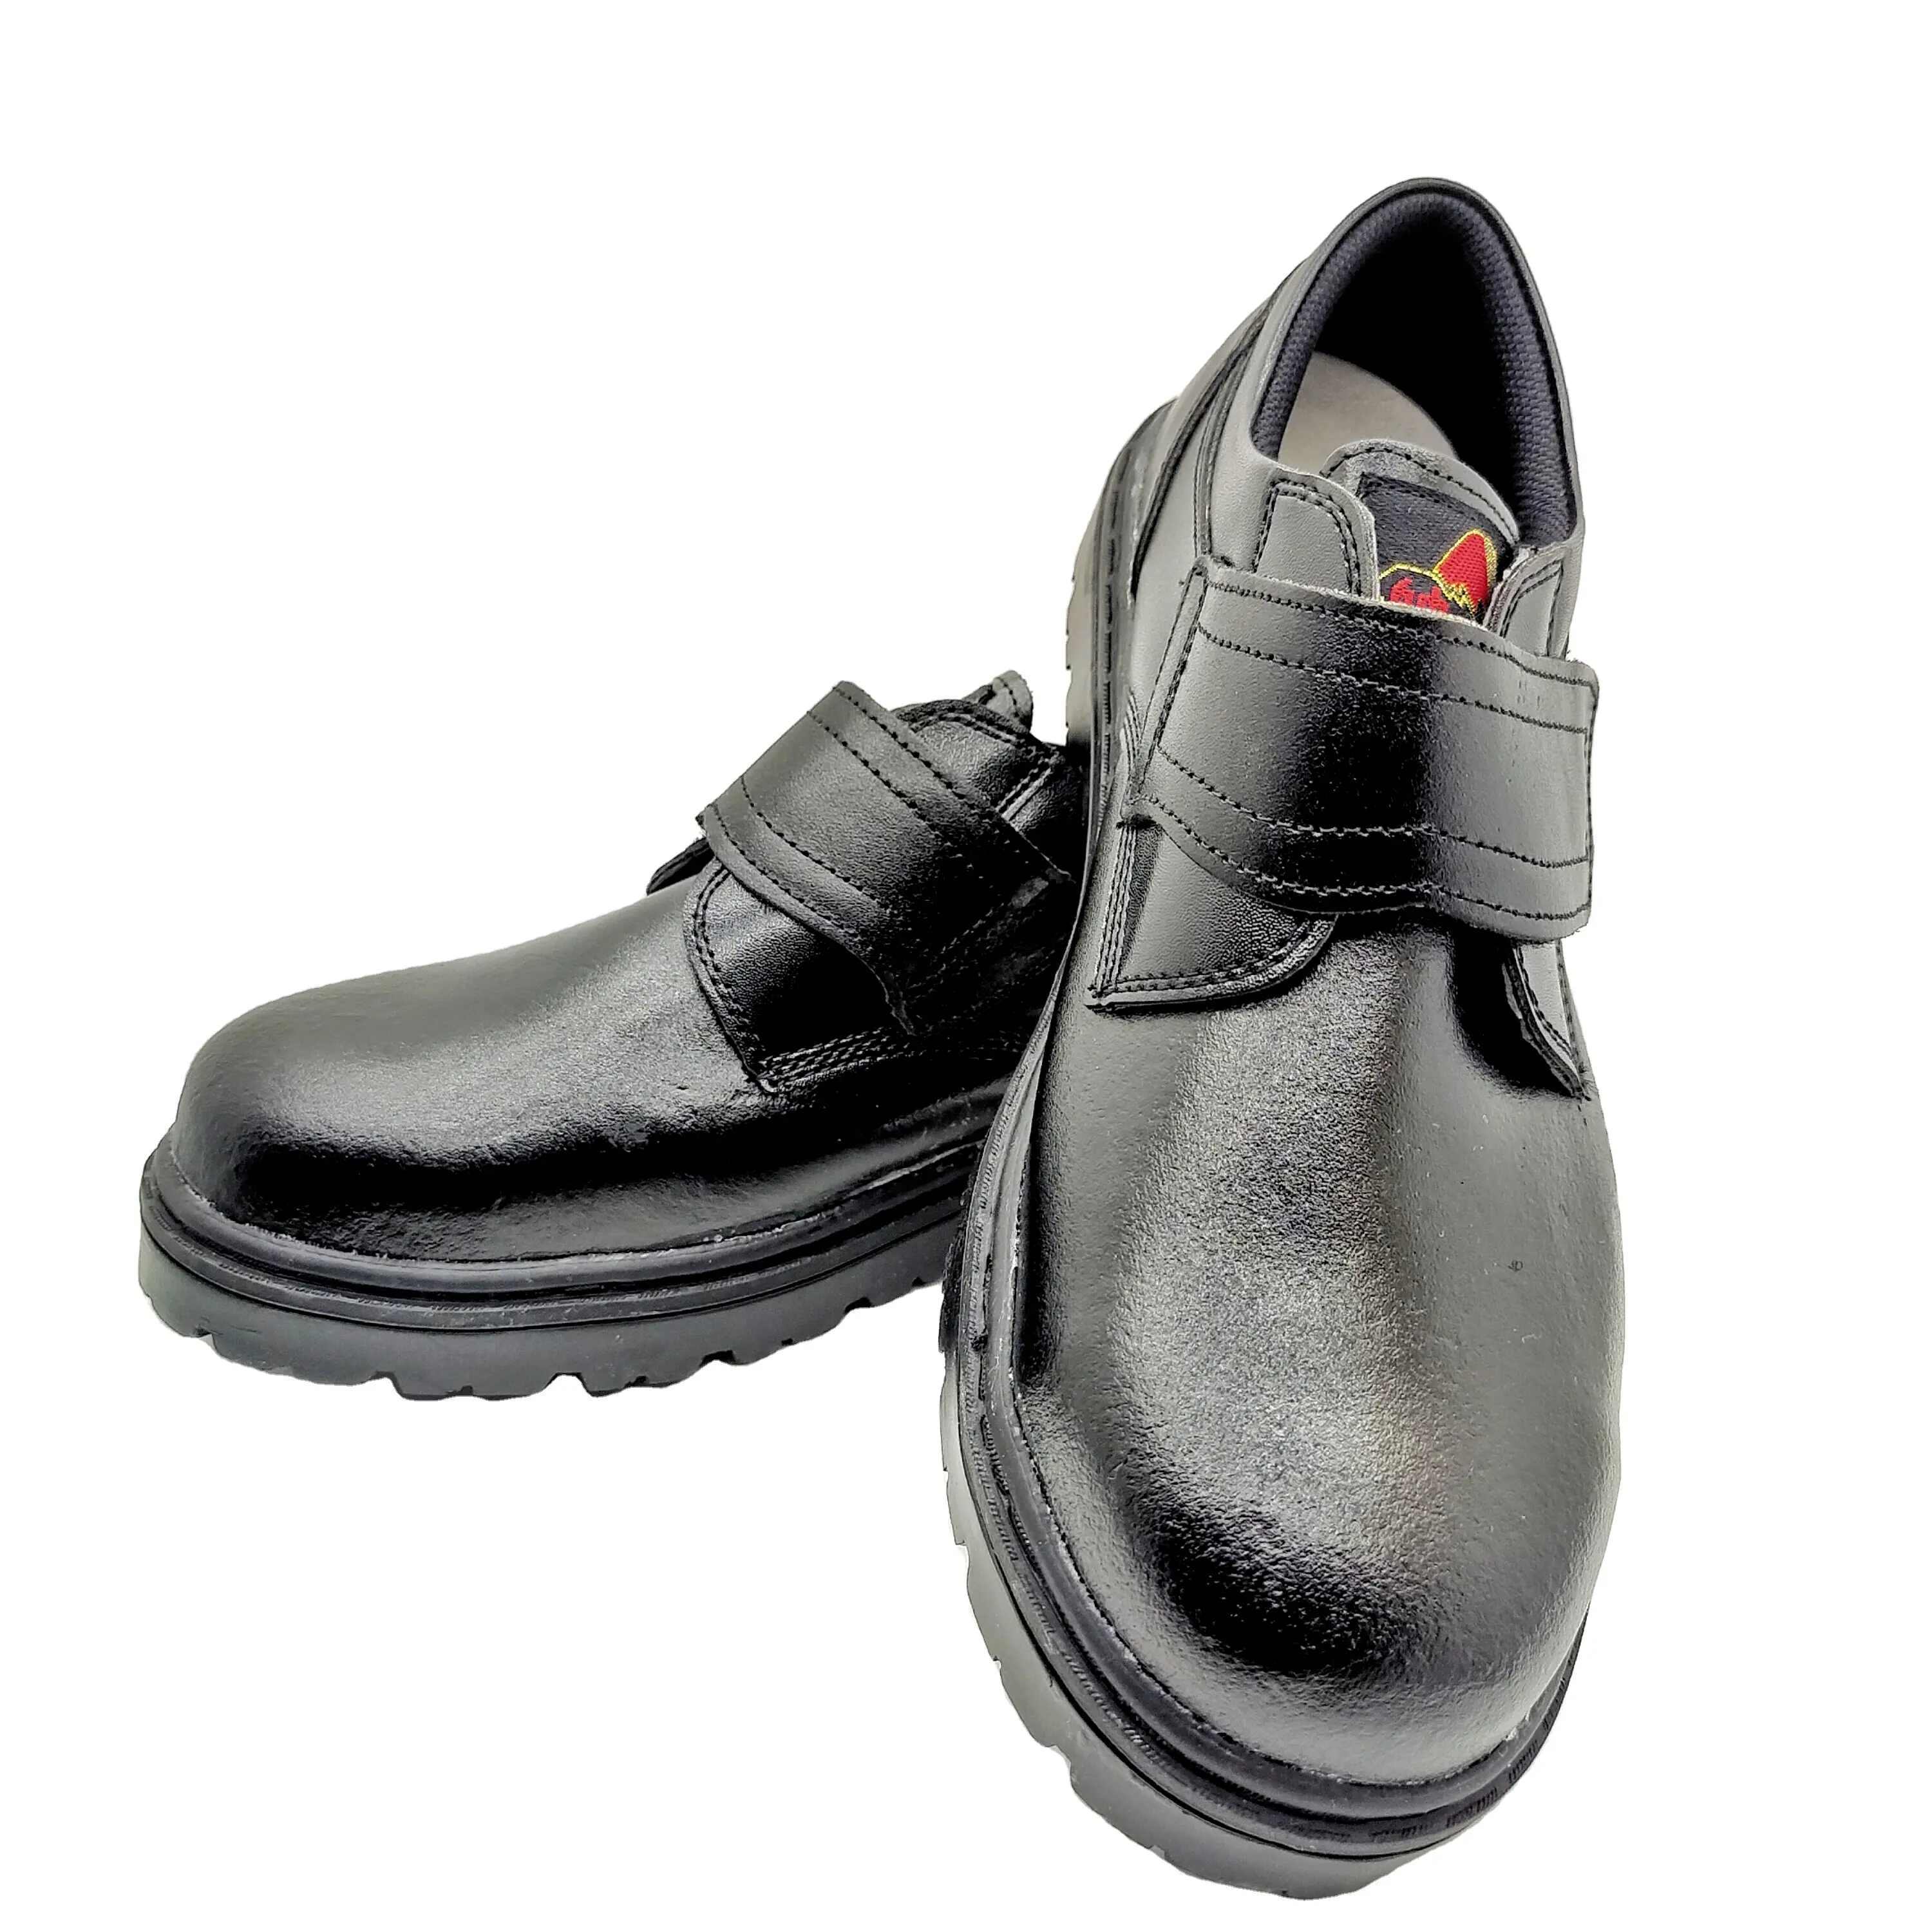 Taiwan Made Black Leather Puncture-Proof Safety Shoes